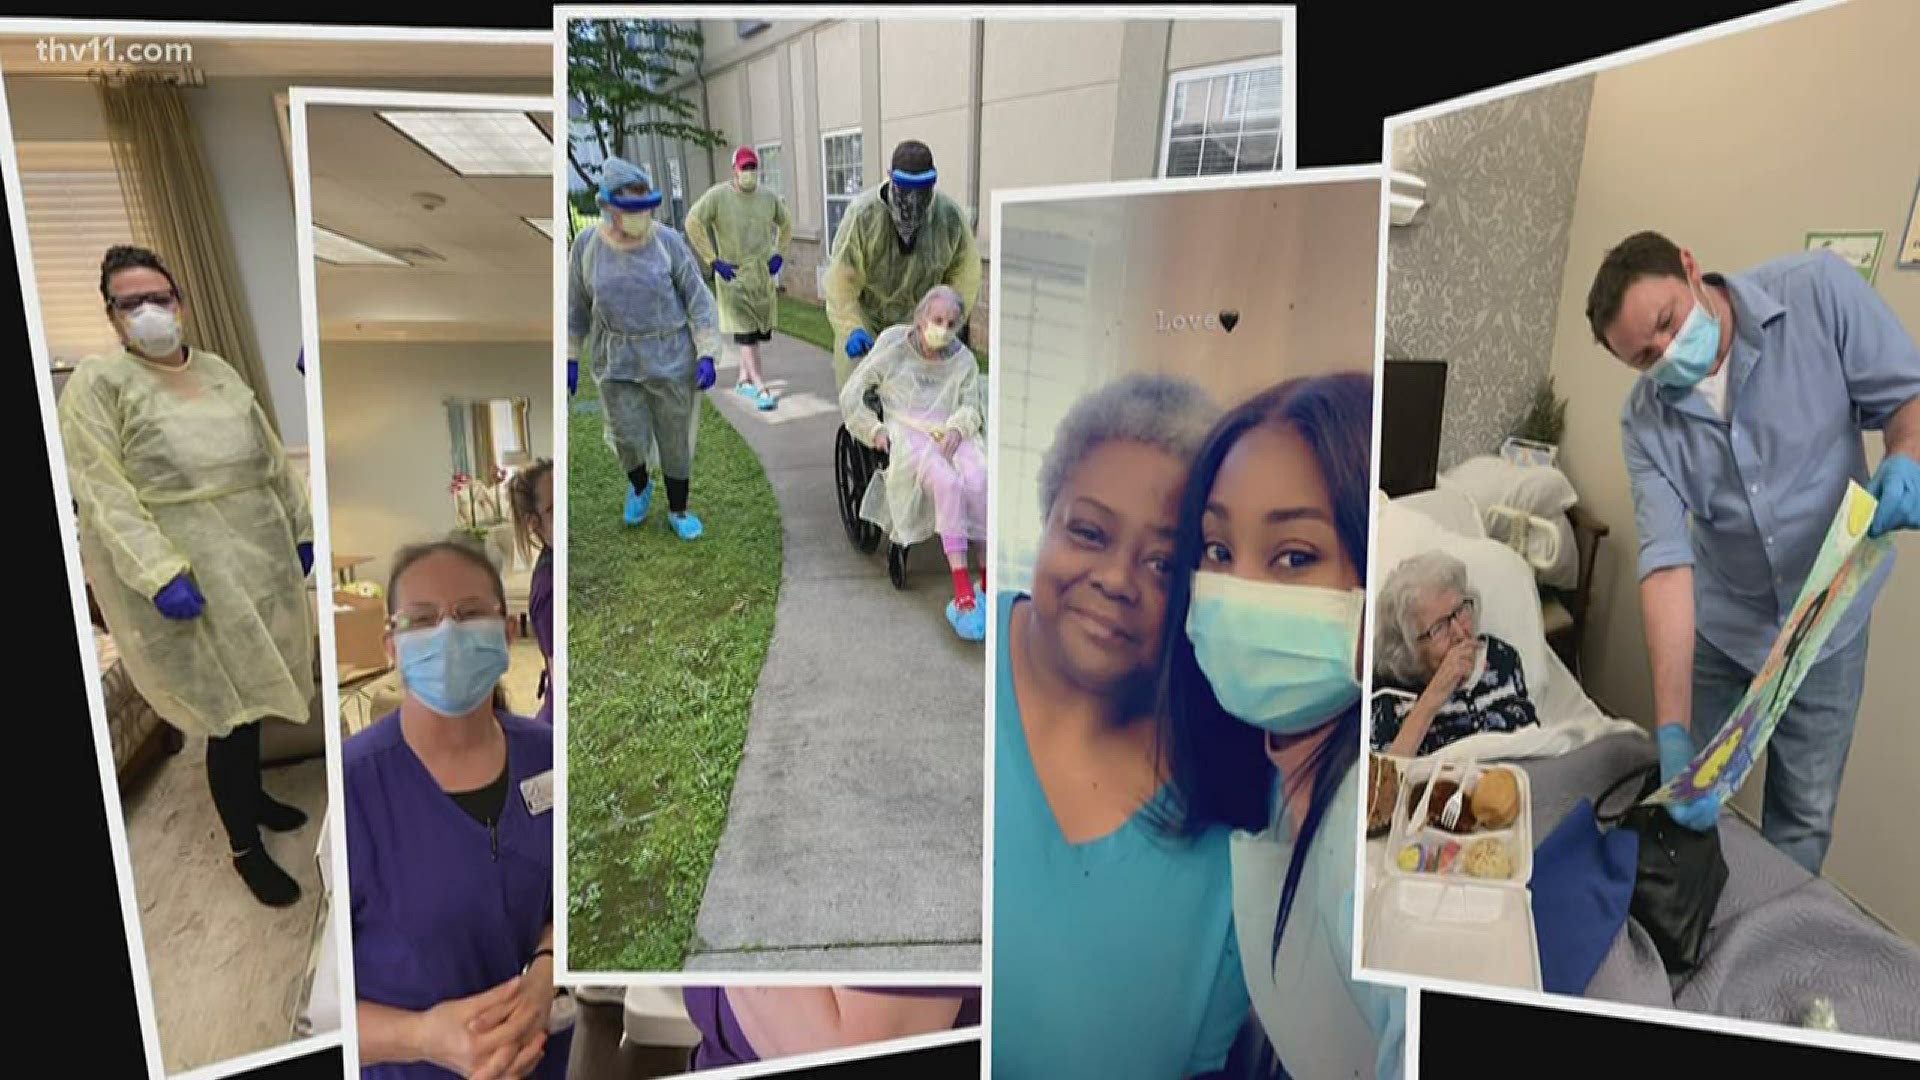 Nursing homes are among the most vulnerable. We got an in-depth exclusive look at Briarwood, the first facility under attack, which is now free of COVID-19.